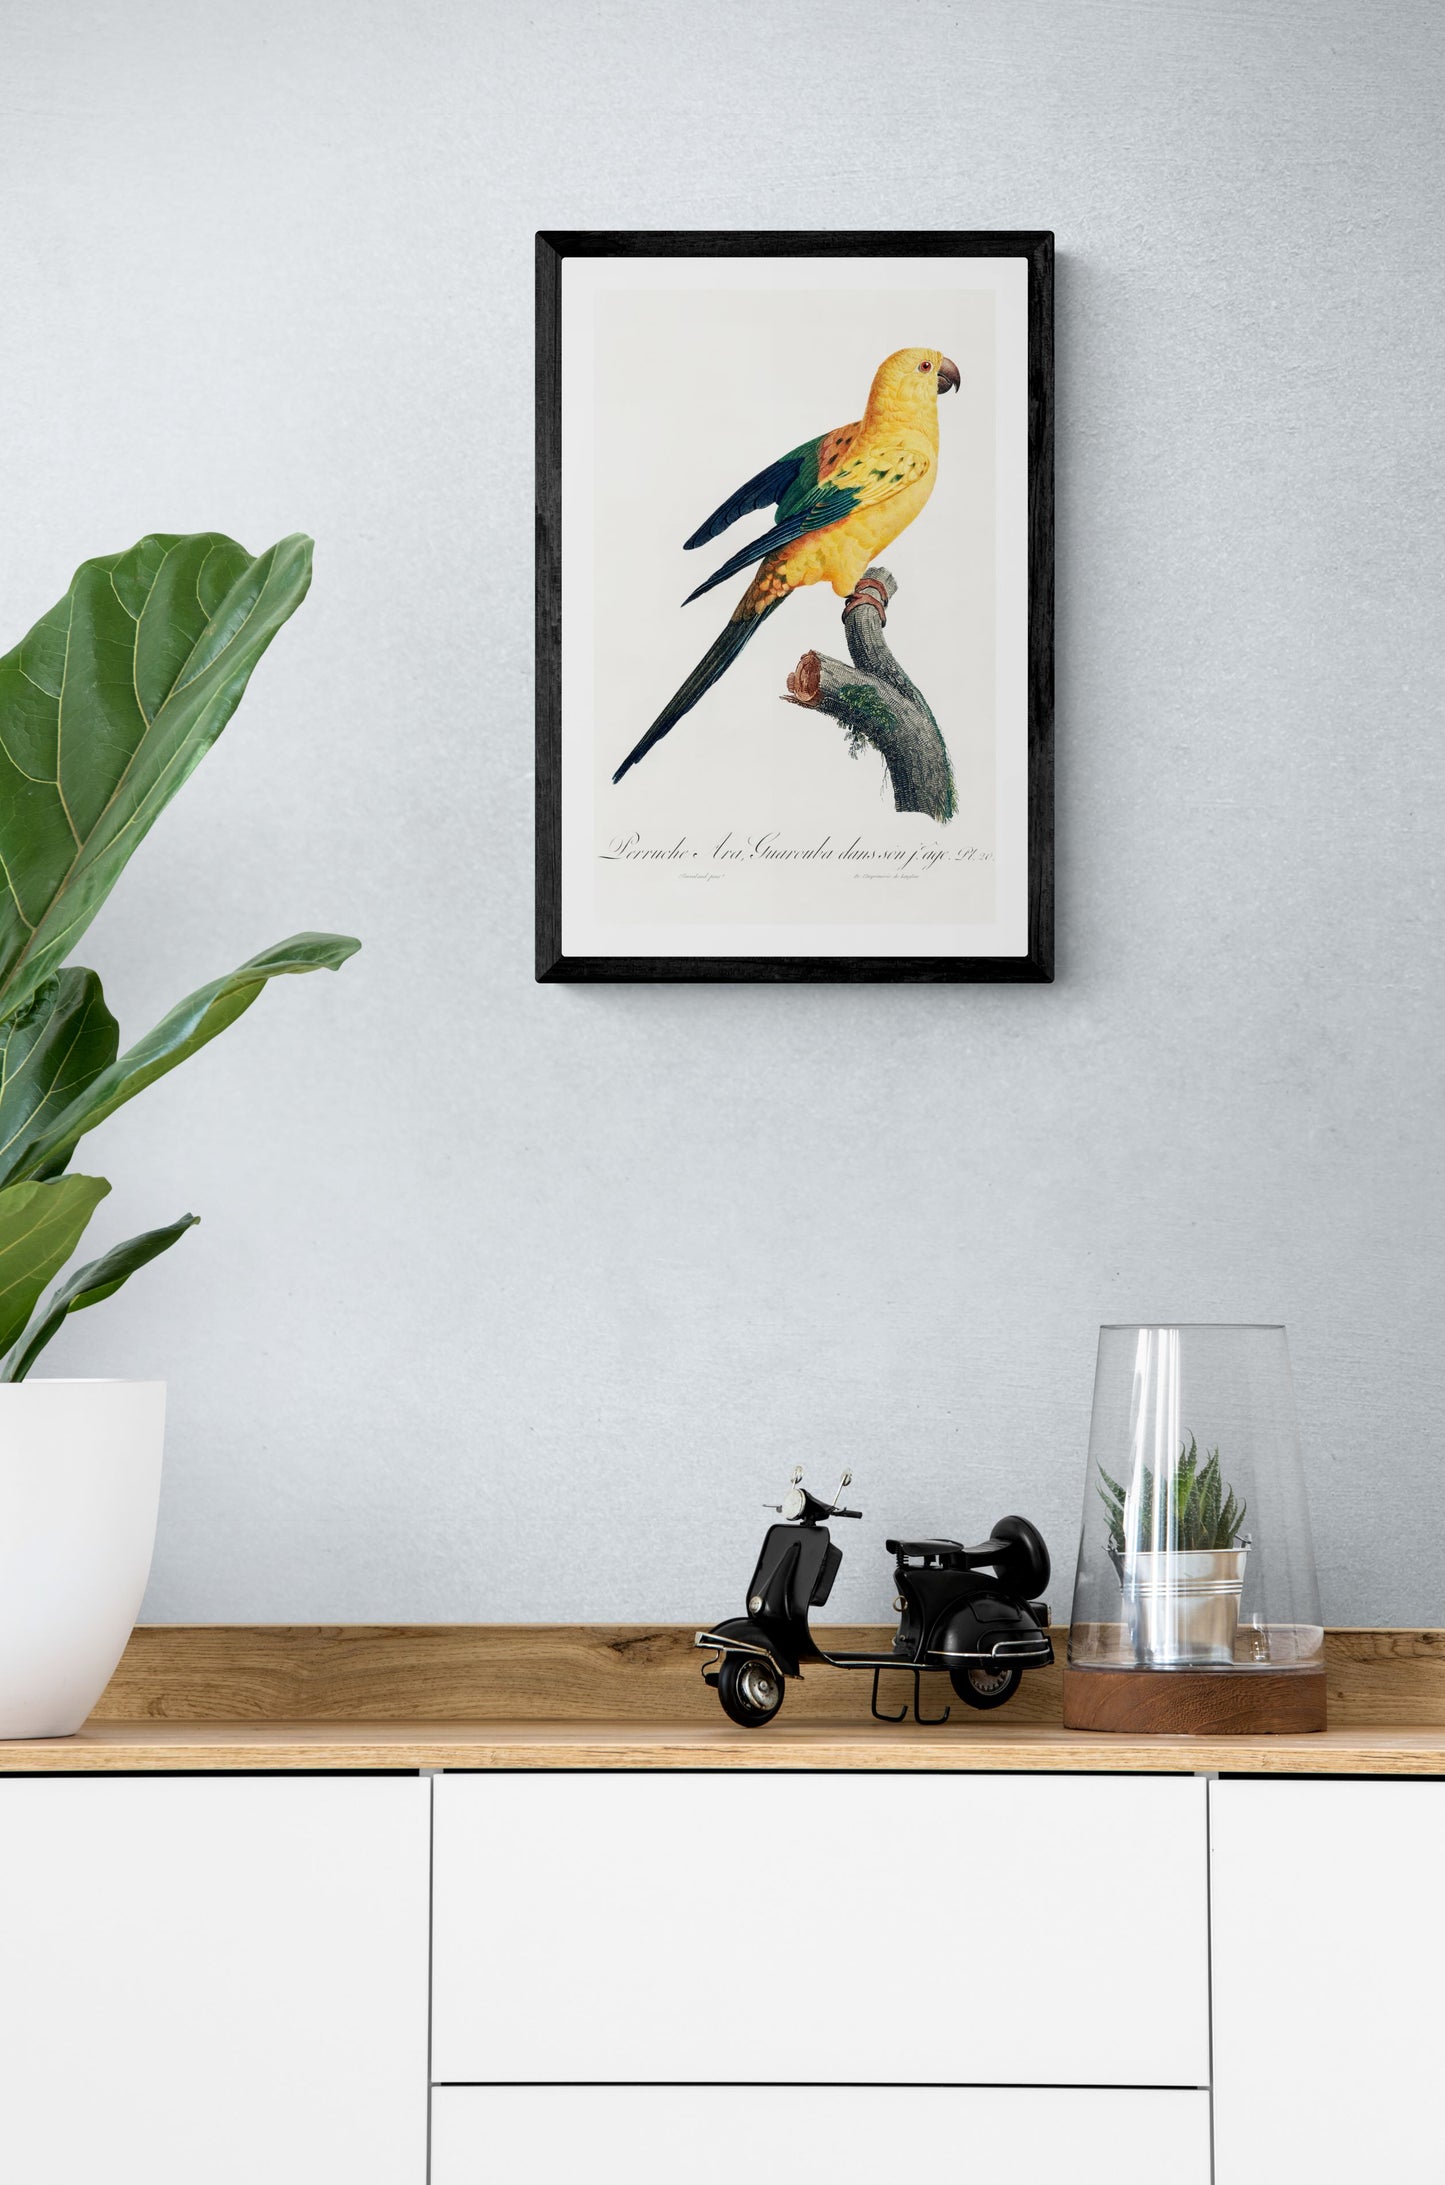 Vintage naturalistic The Sun Parakeet, Aratinga solstitialis illustrations. Prints on art paper, canvas and framed canvas. Free shipping in the USA.